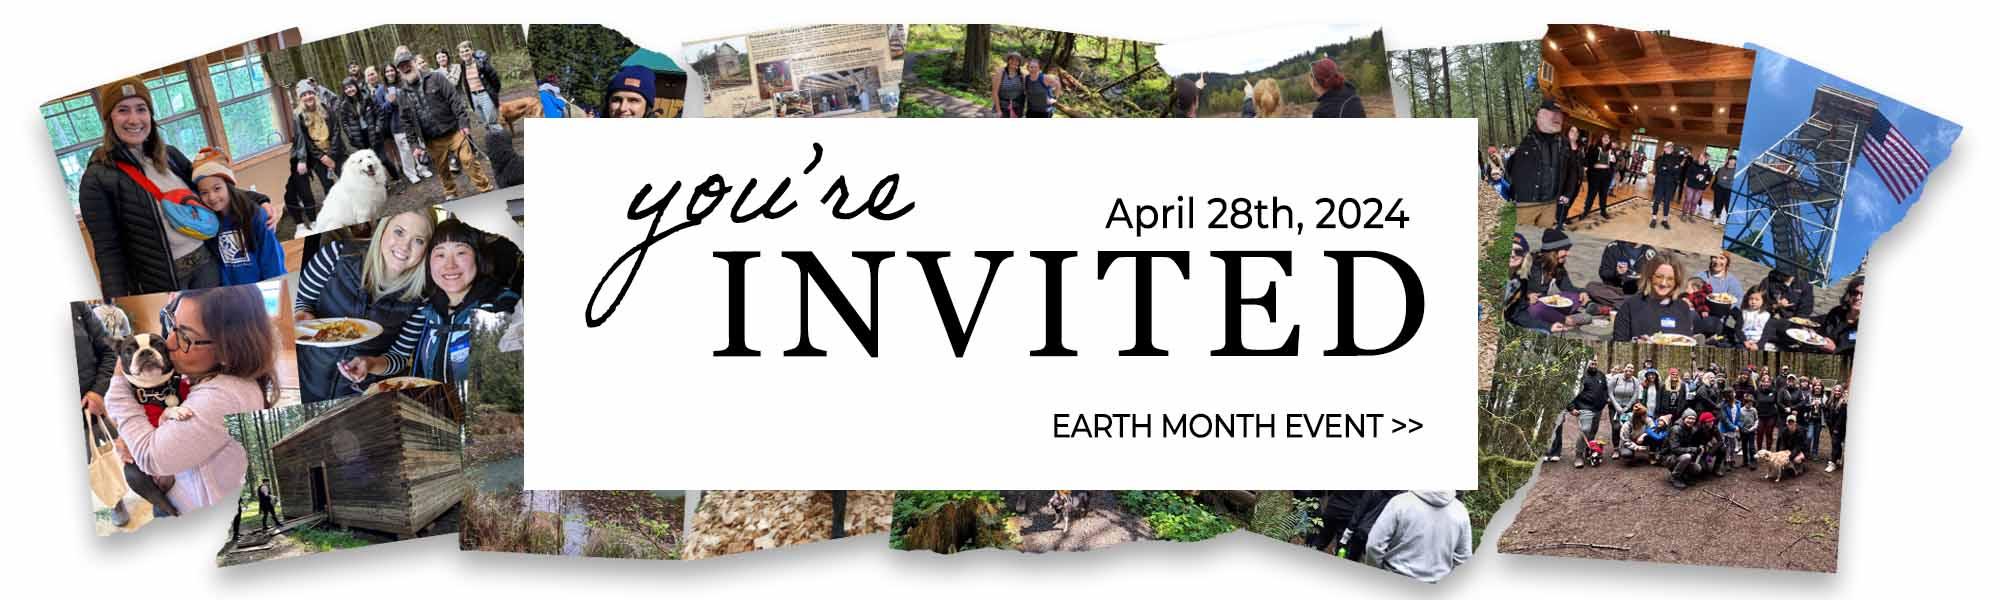 Image of an Earth Month Invite with the dosha team celebrating at hopkins demonstration forest